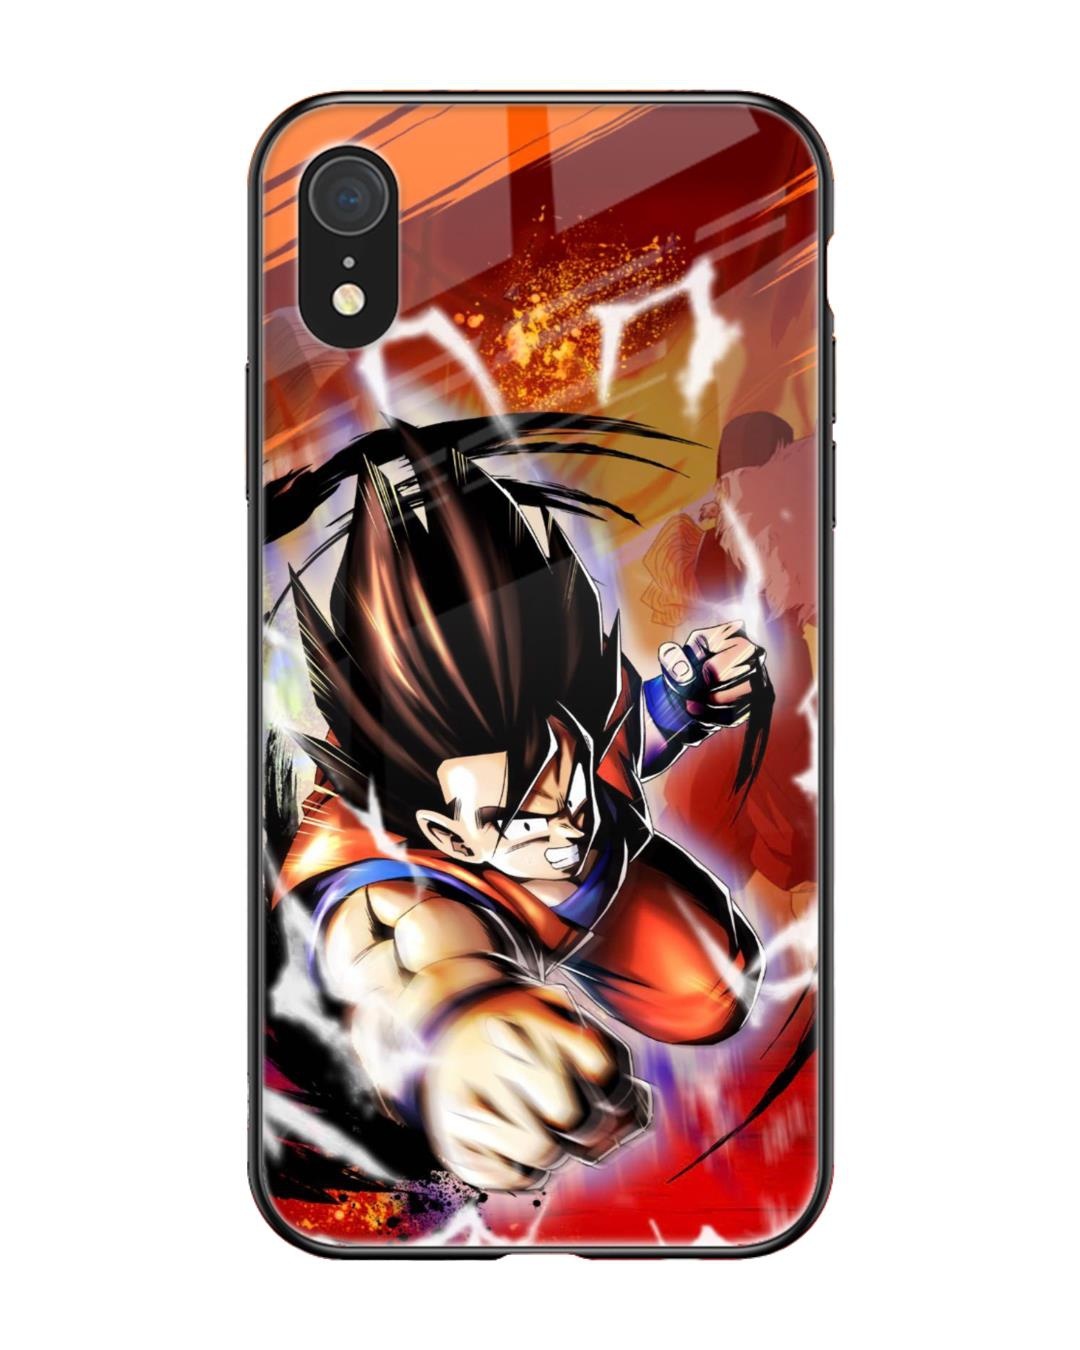 iPhone Xr Cases Looking for by Denis Orio Ibañez  ArtsCase